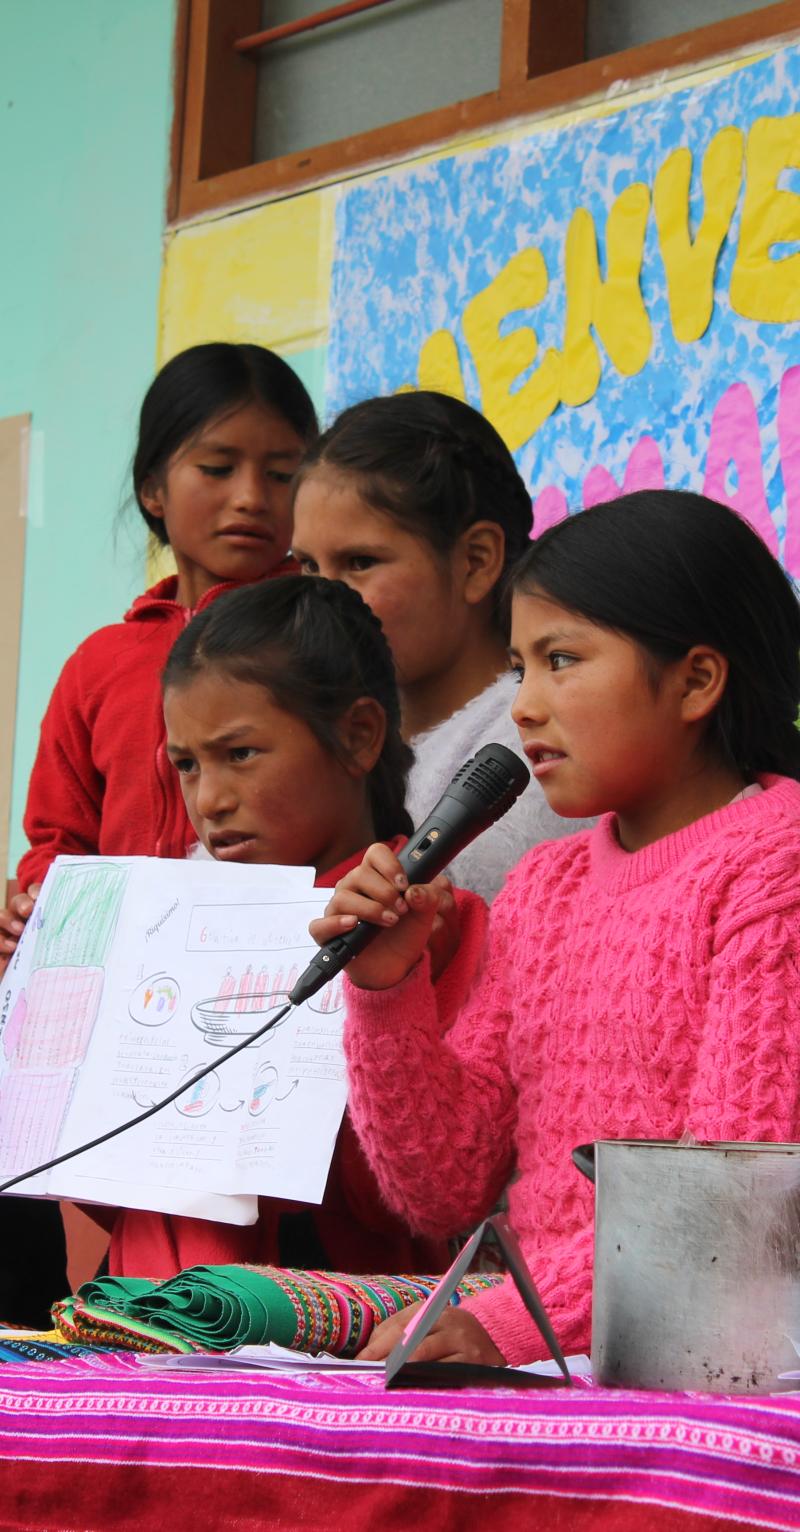 A group of children are presenting their project on how to address anemia in their community. One child in the center of the group is speaking into a microphone she is holding. A child to the left of her is holding up drawings to show the audience. The child next to that one is looking at the speaker. There are colorful bulletin boards in the background.